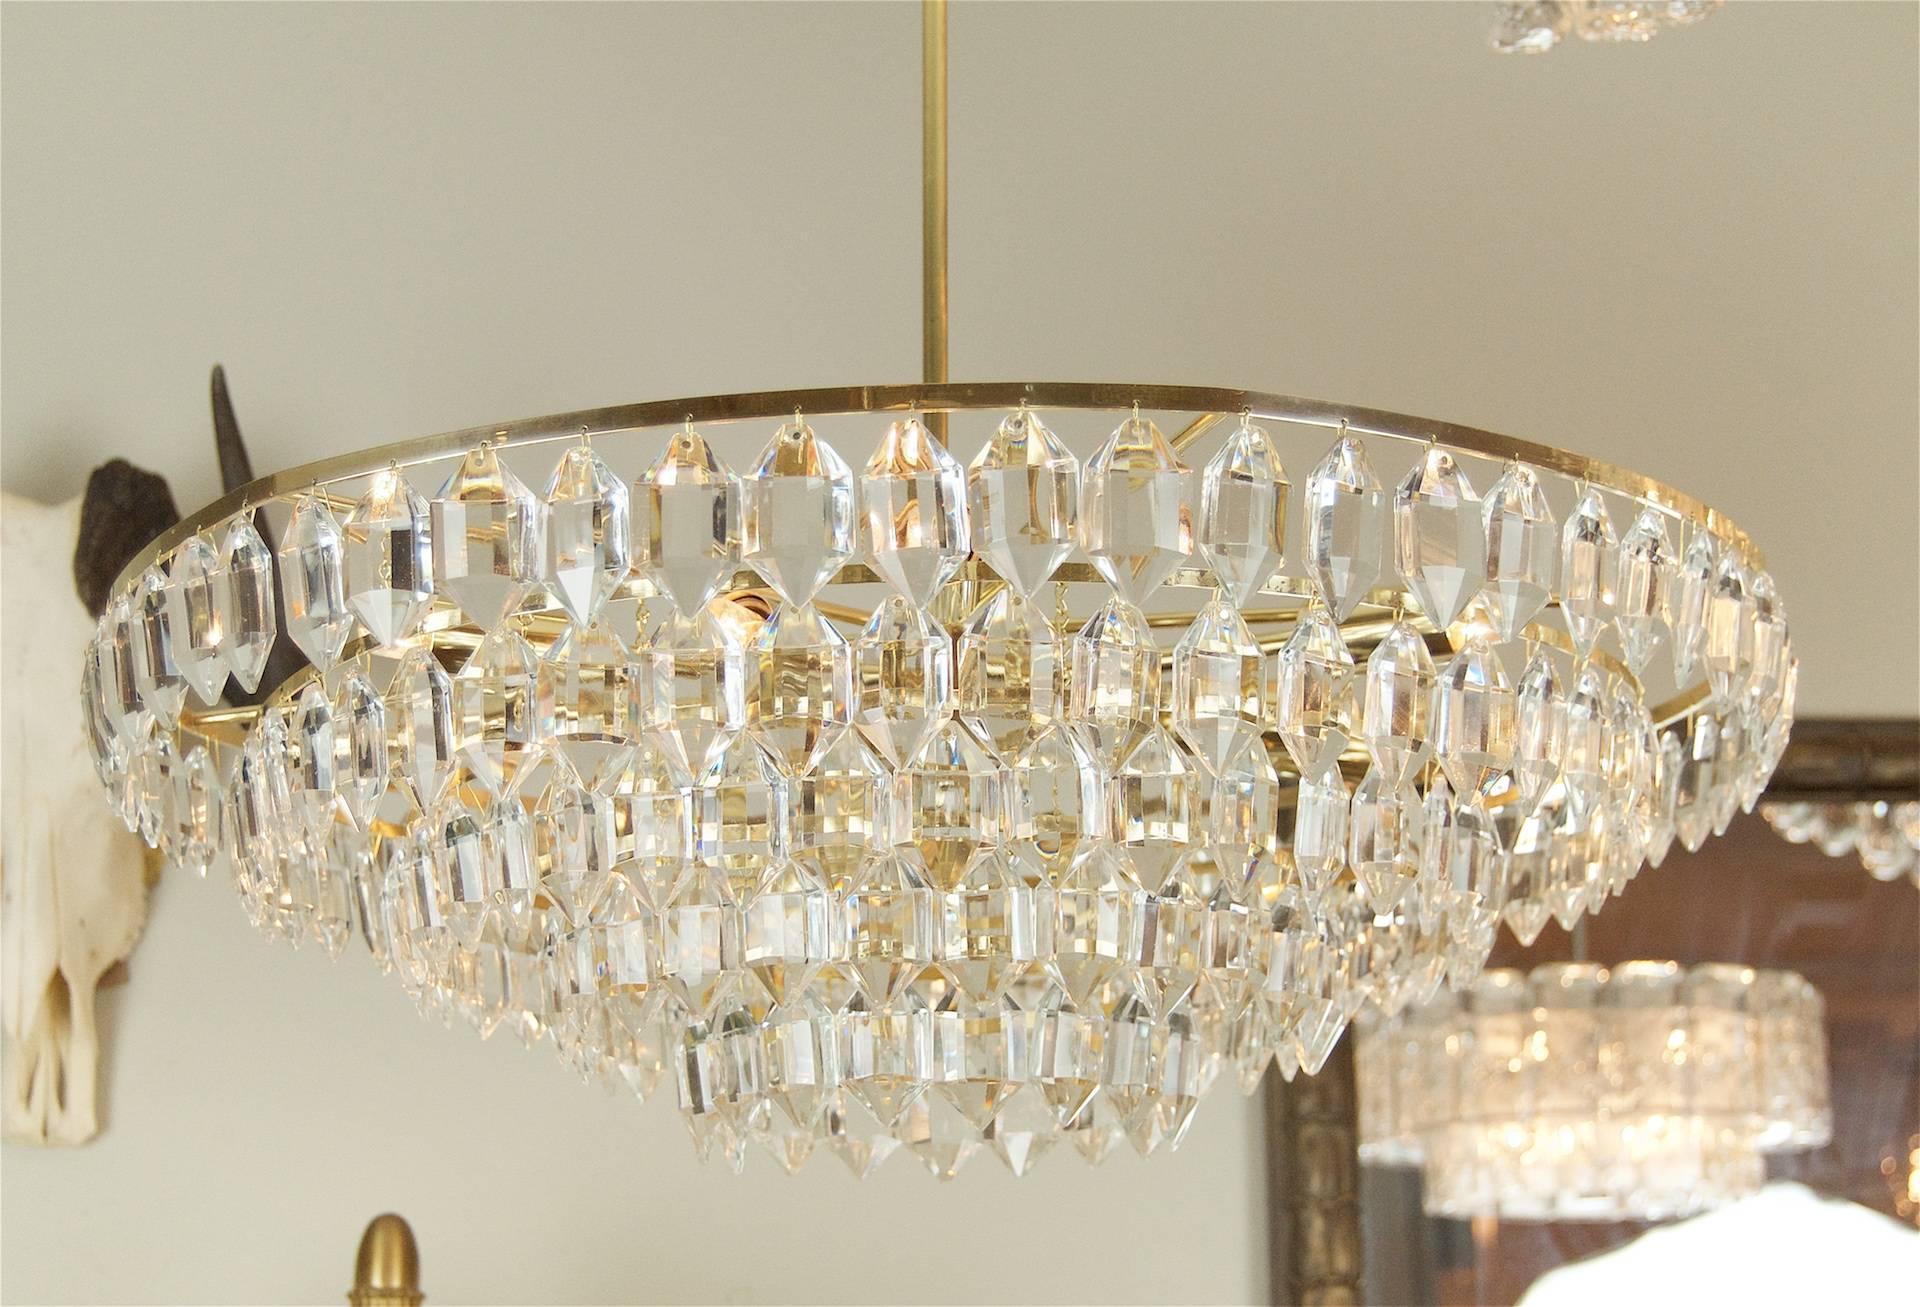 Large chandelier by Palwa consisting of five tiers of hexagonal crystals. Well-sized and lustrous.

Takes 9 E-14 base bulbs up to 40 watts per bulb, new wiring.

Measure: Height listed is of chandelier body only; height as hung is 23.5